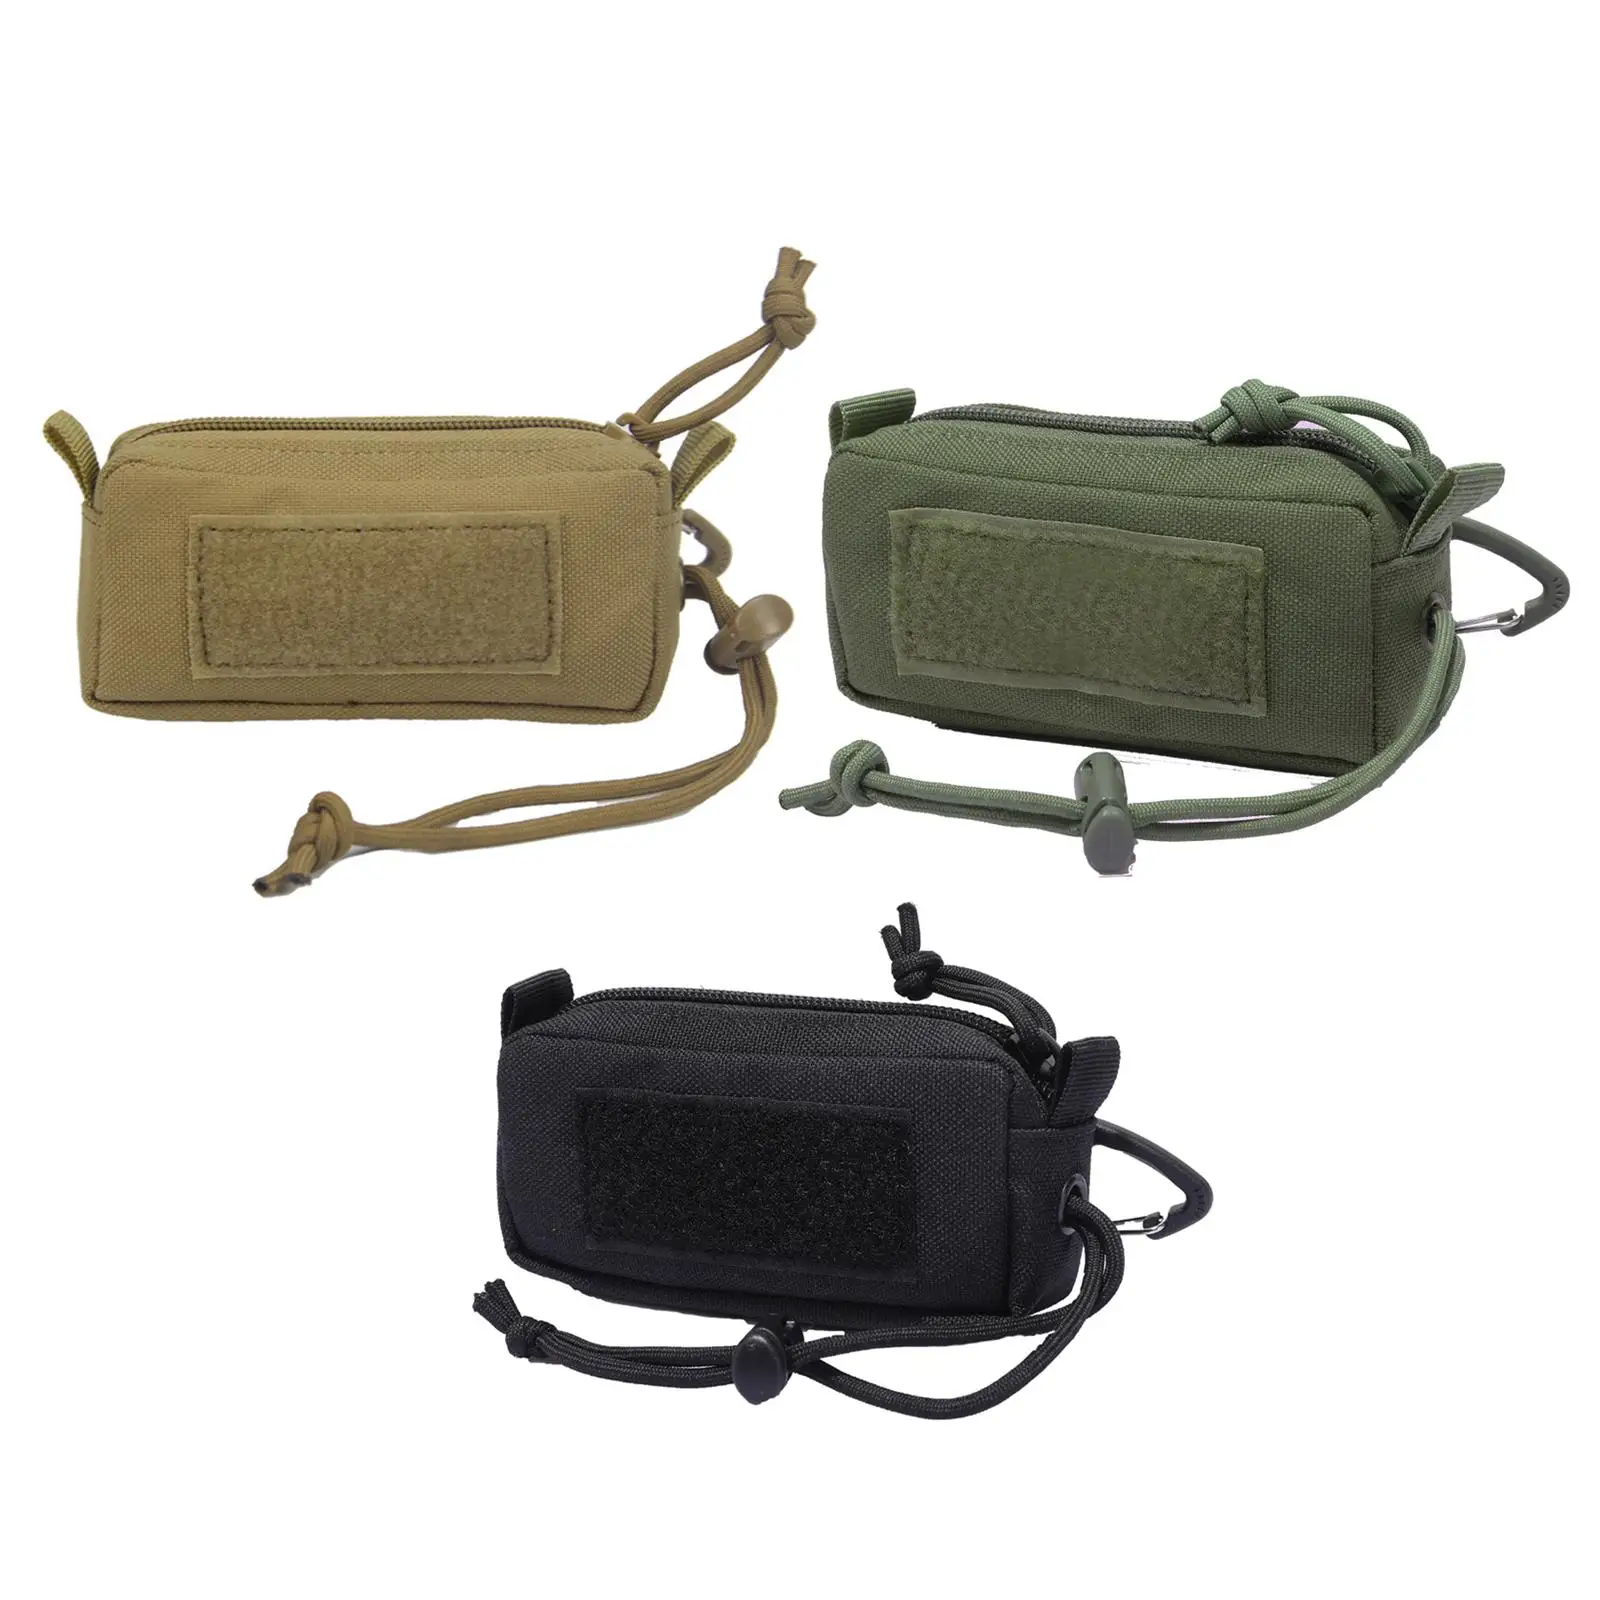 Portable Waist Bag Pack Zipper Closure 1000D Nylon Multi-Purpose with Key Ring Key Holder for Phone Credit Cards Hunting Coins